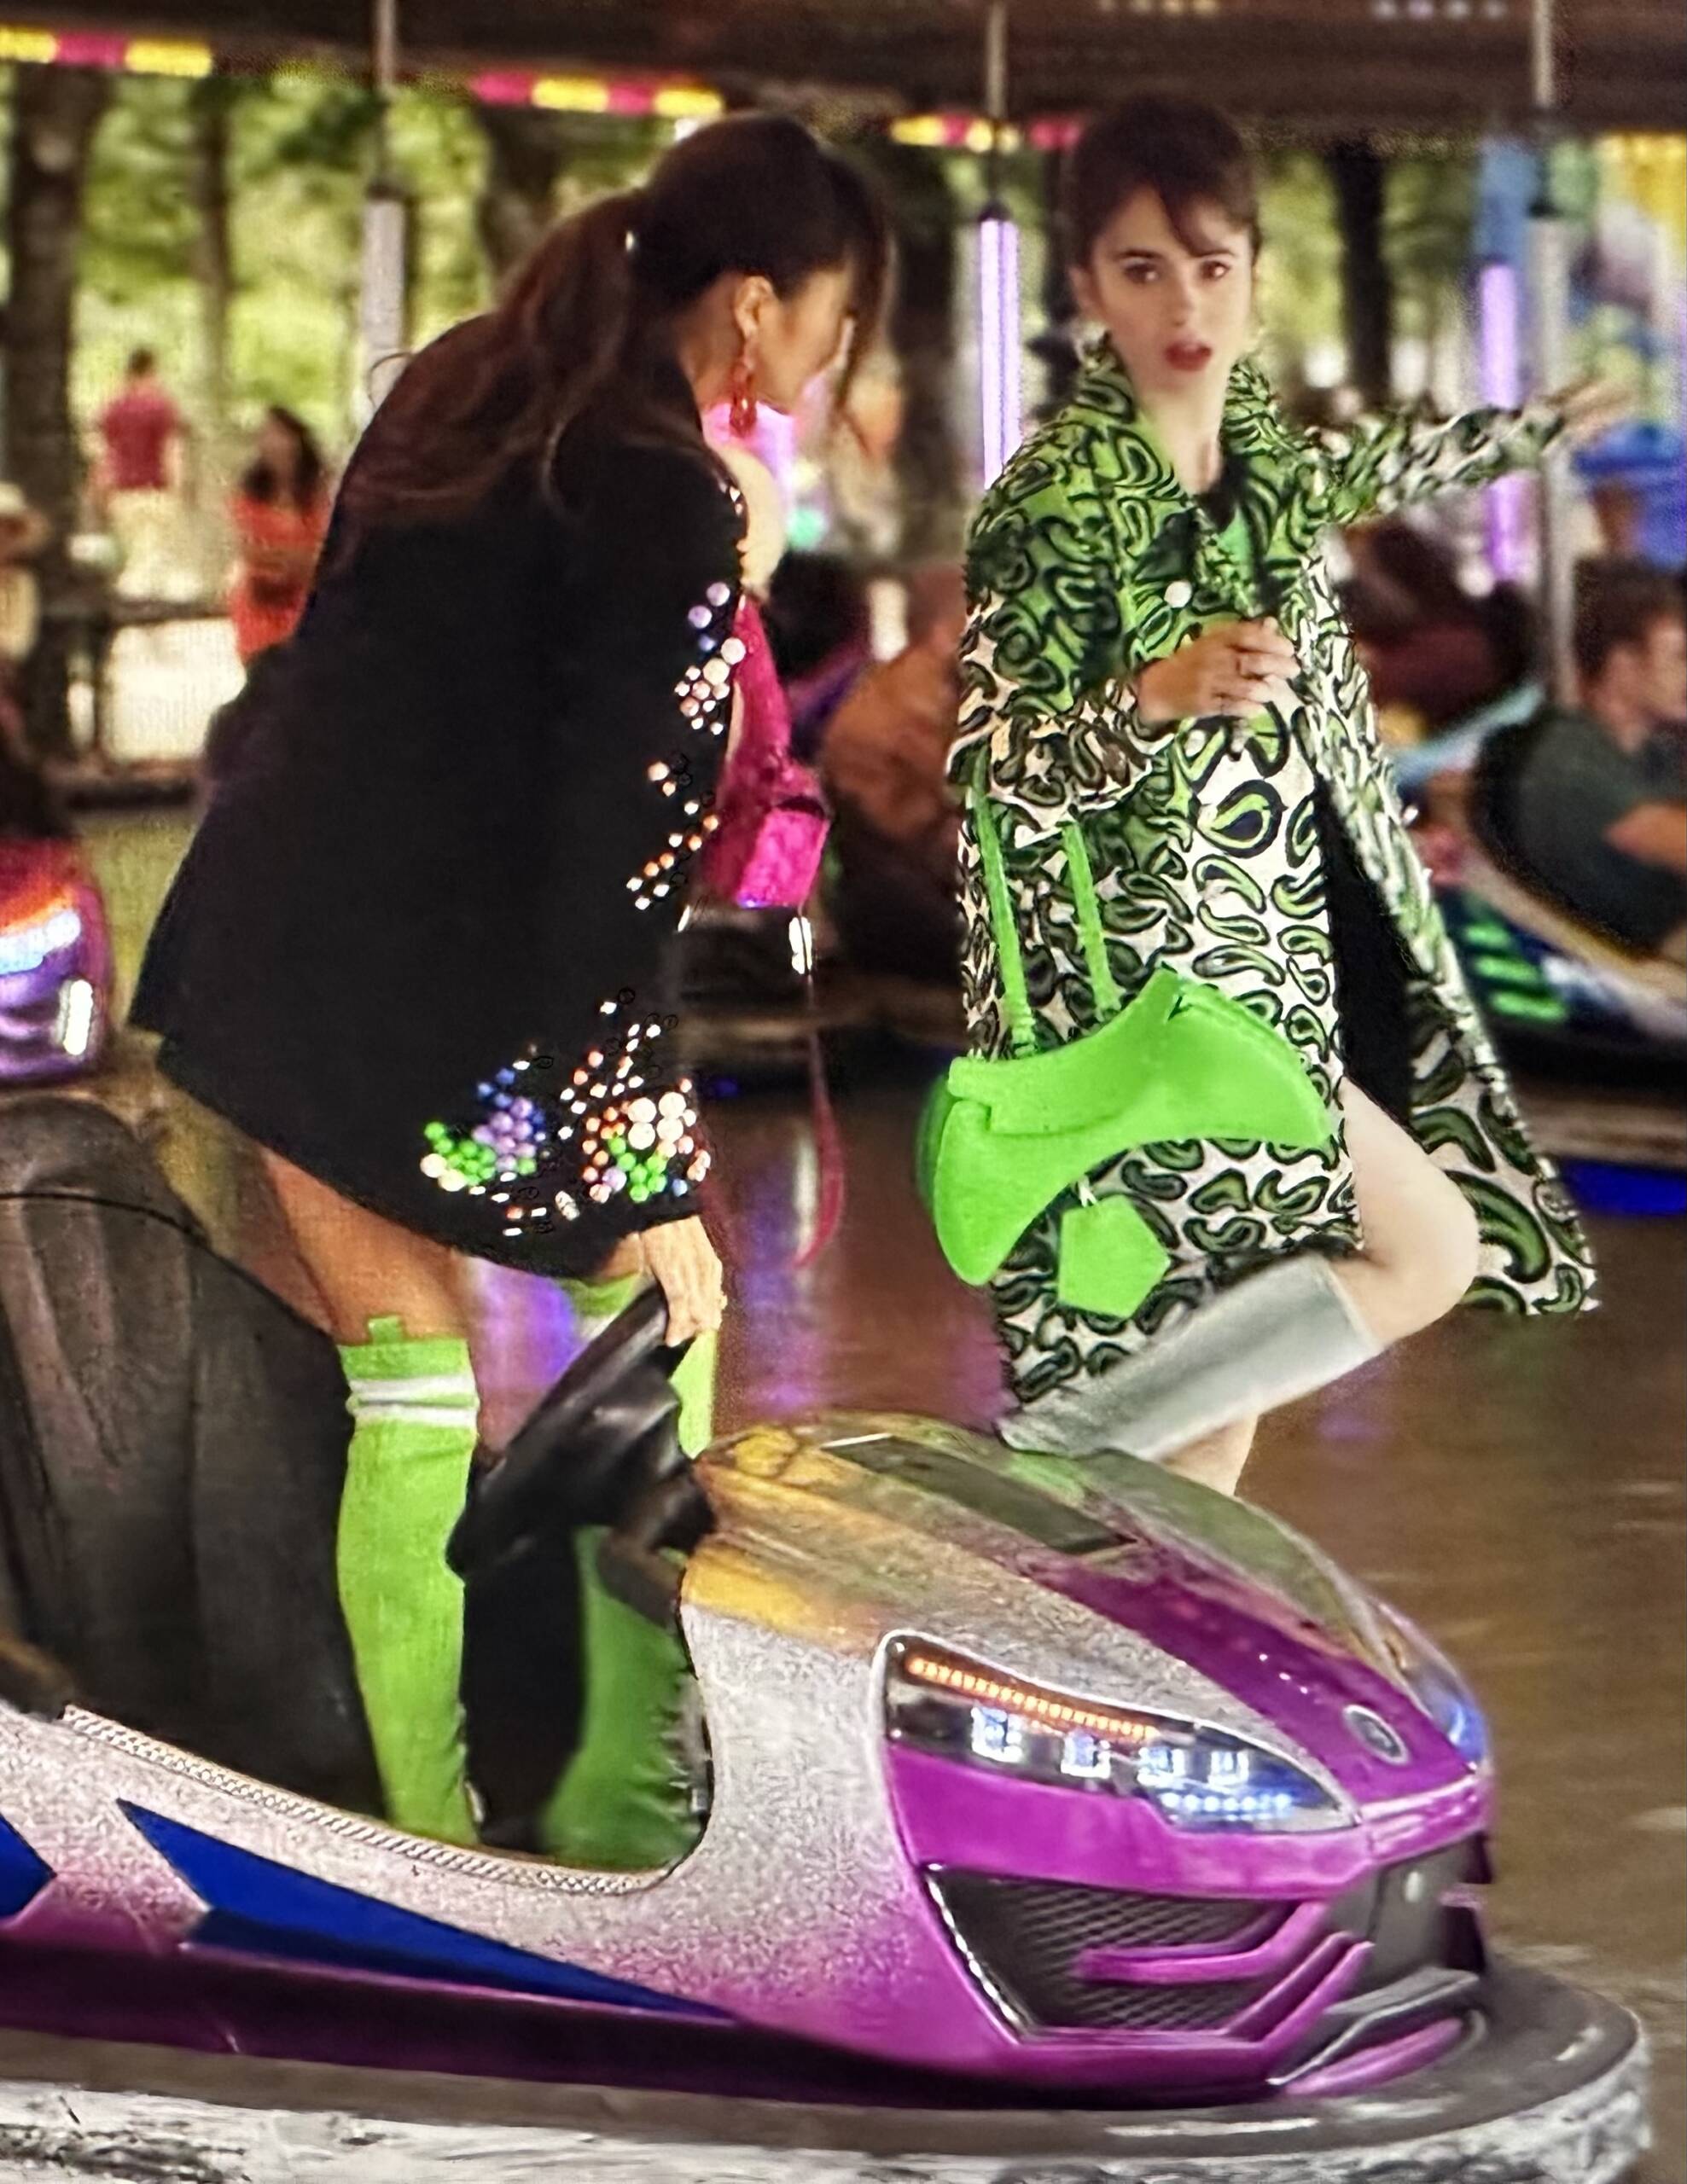 Emily in Paris Season 3 handbags feature Mindy and Emily at a the Paris amusement park in the Tullieries. Lily Collins wears a bright neon Visore X Manette bag Fluo handbag and Miu Miu printed coat. Ashley Park wears neon green boots and a sequin hot pink baguette bag | Shop Bags of Emily in Paris Season 3